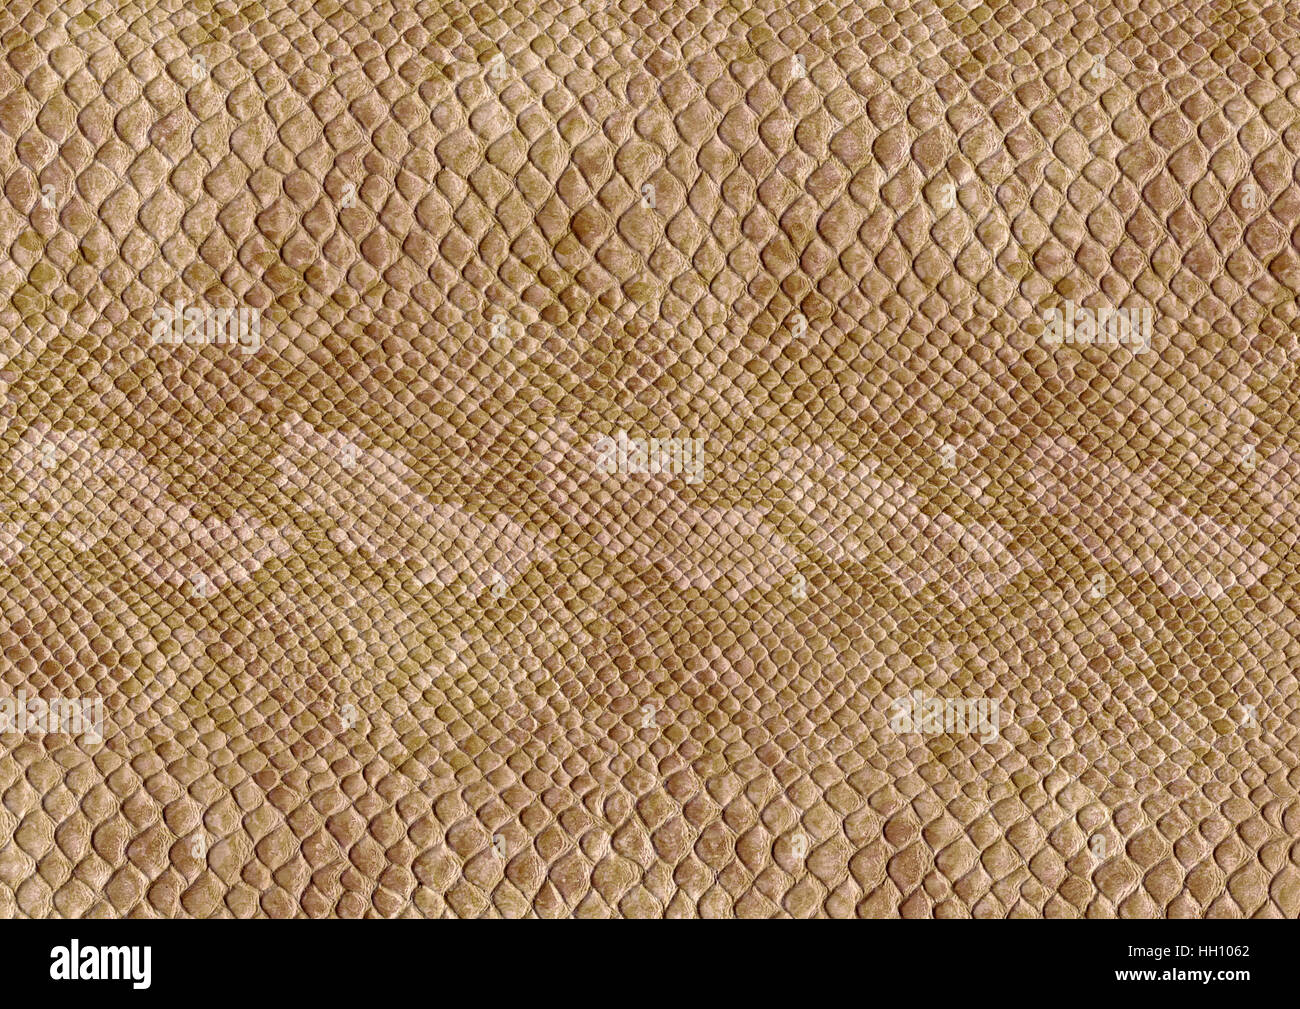 full frame scaled abstract brown patterned reptile skin surface Stock Photo